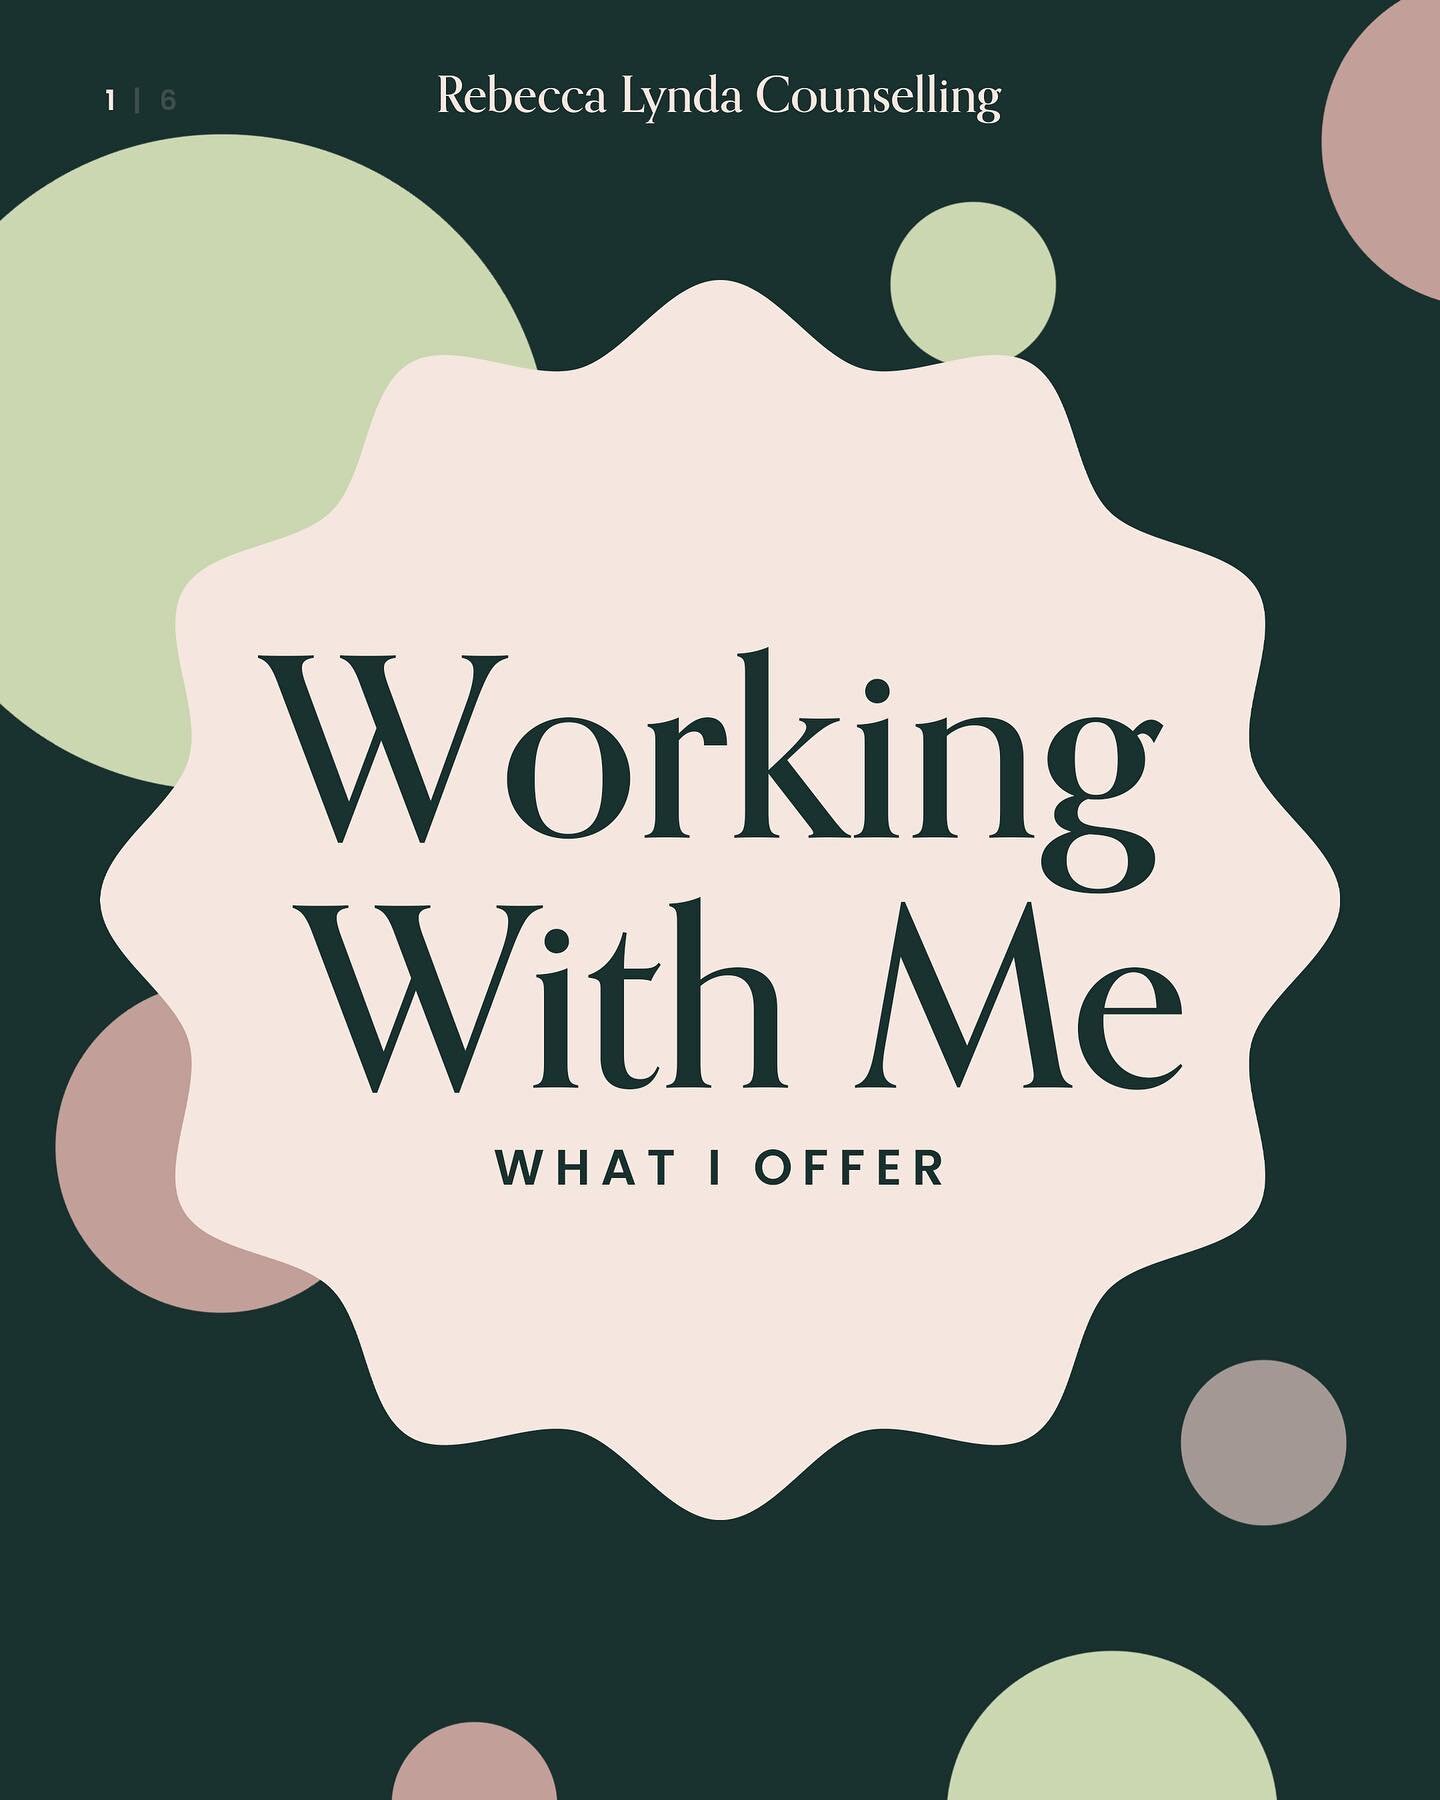 Working with me &bull; Finding the right counsellor is important. To learn more visit my website - link is in my bio.